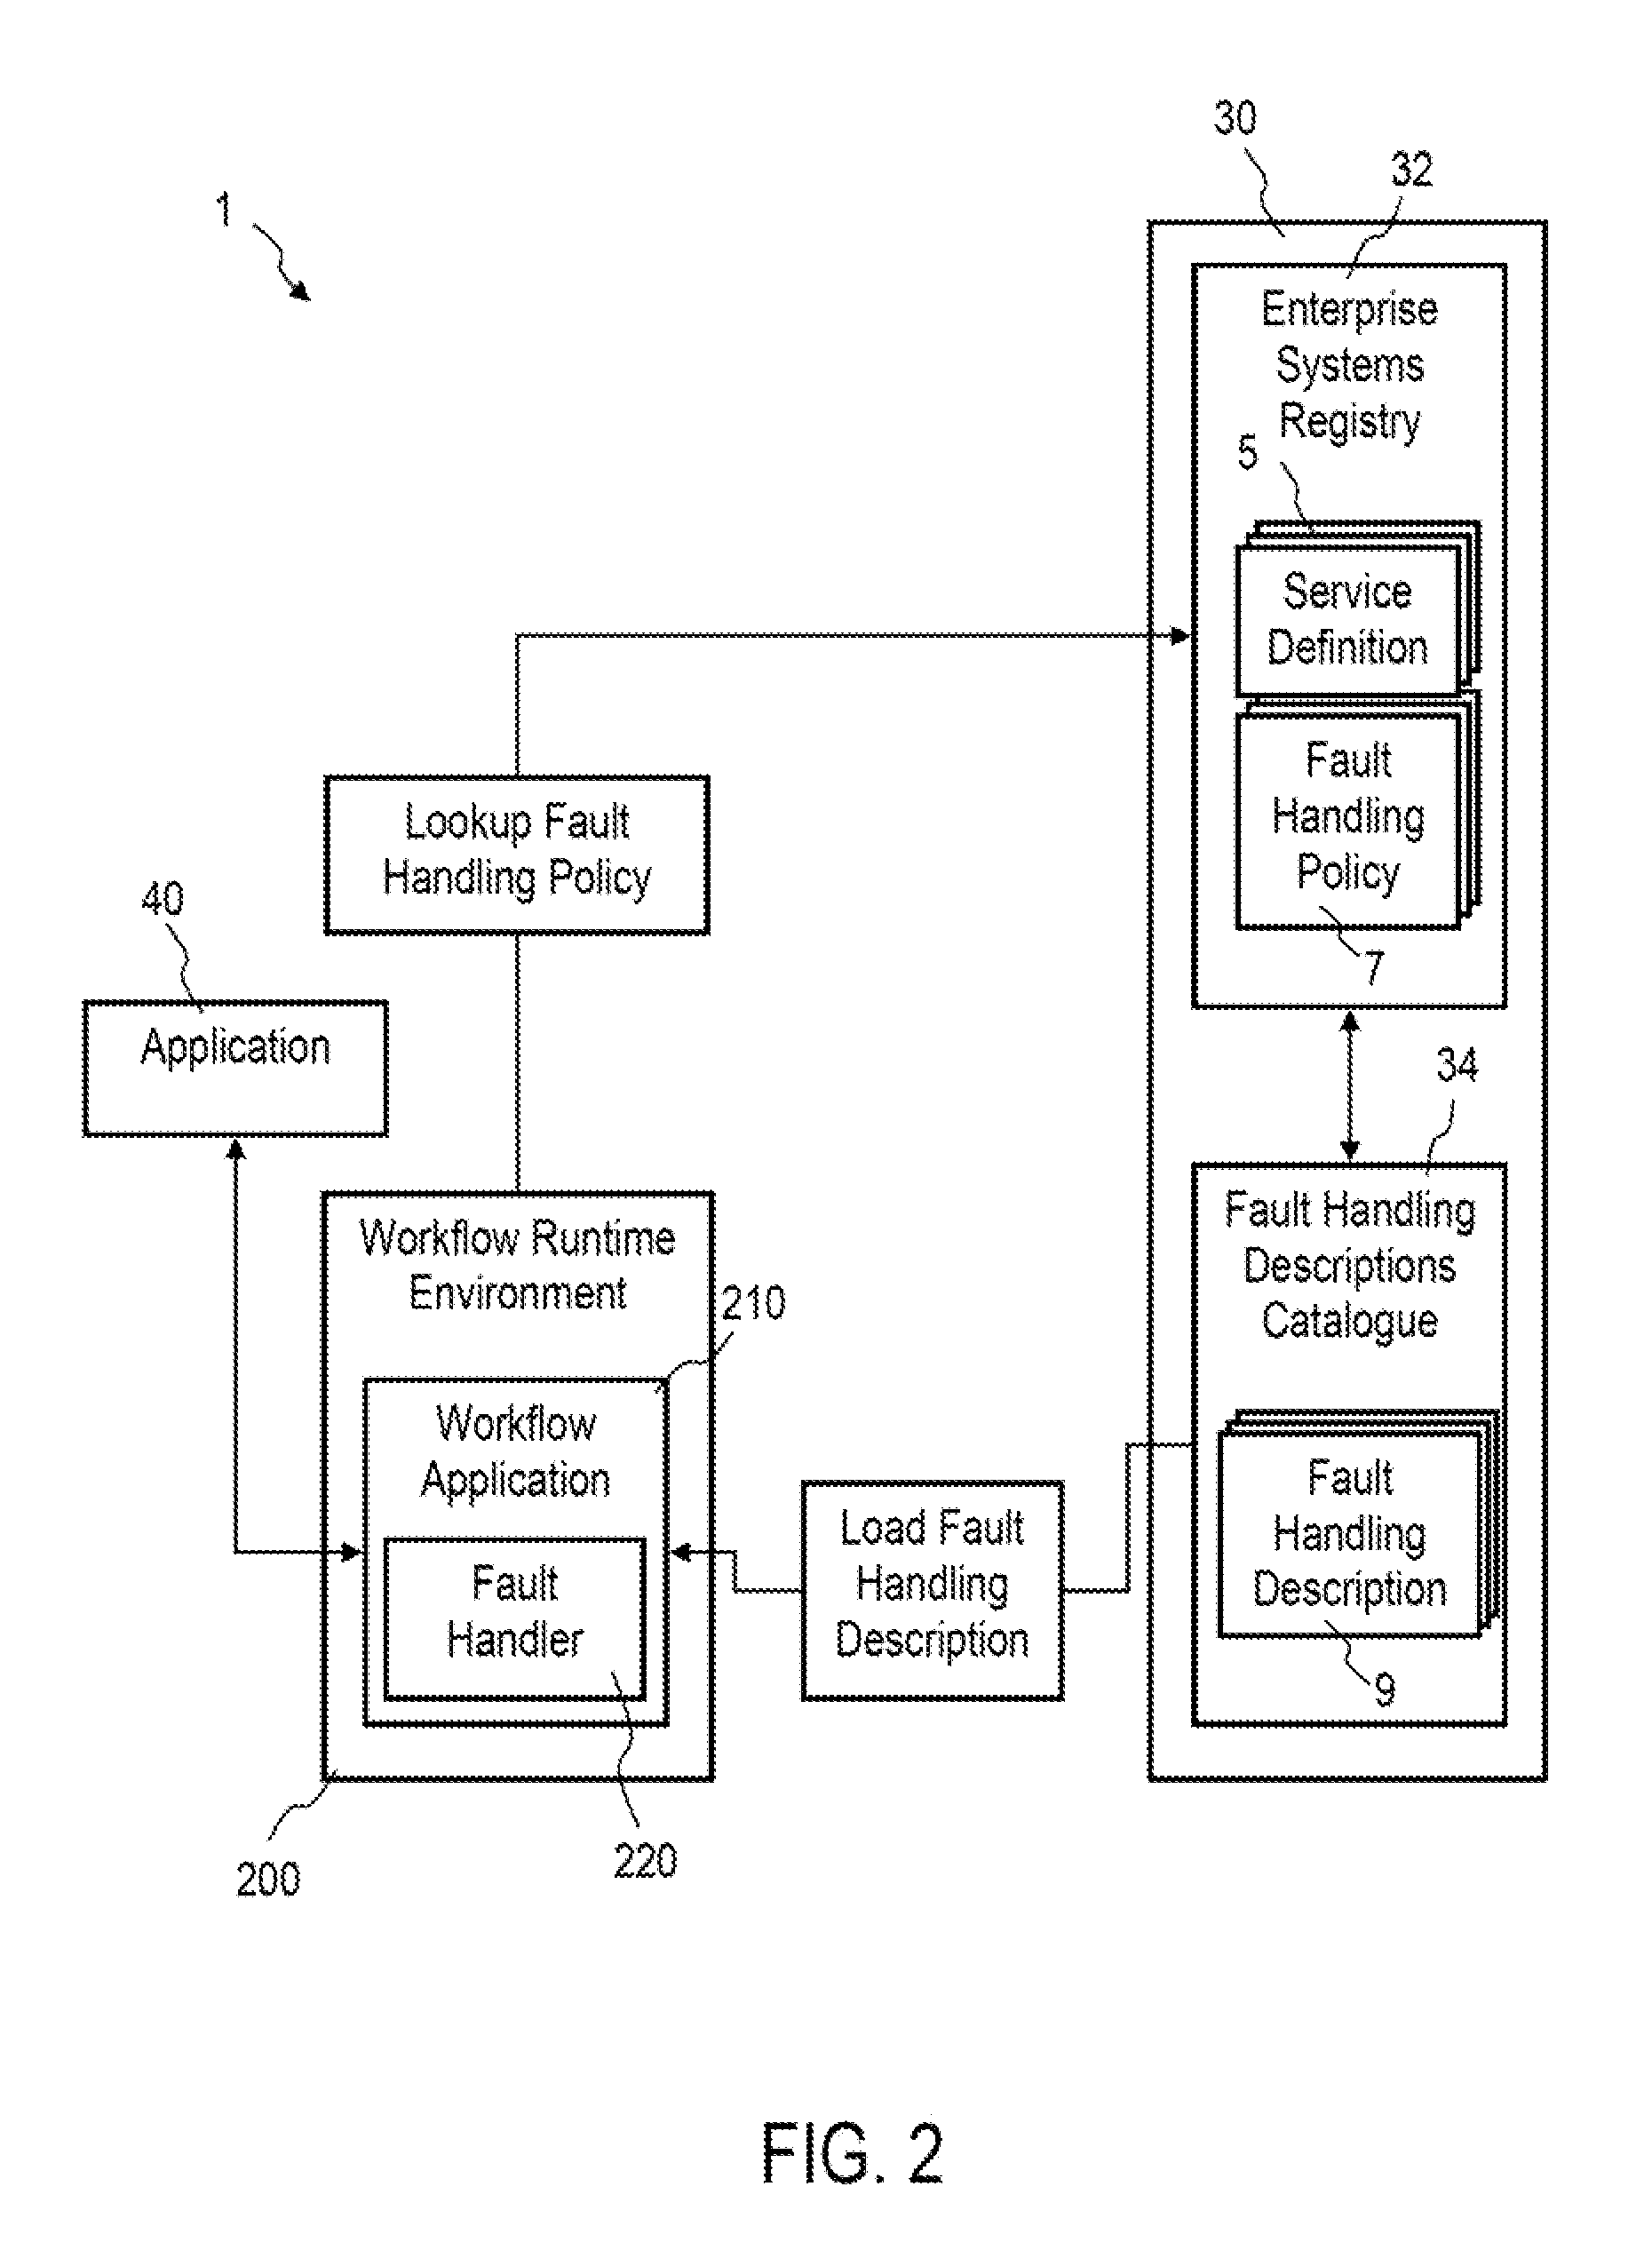 Method and Arrangement for Fault Handling in a Distributed IT Environment